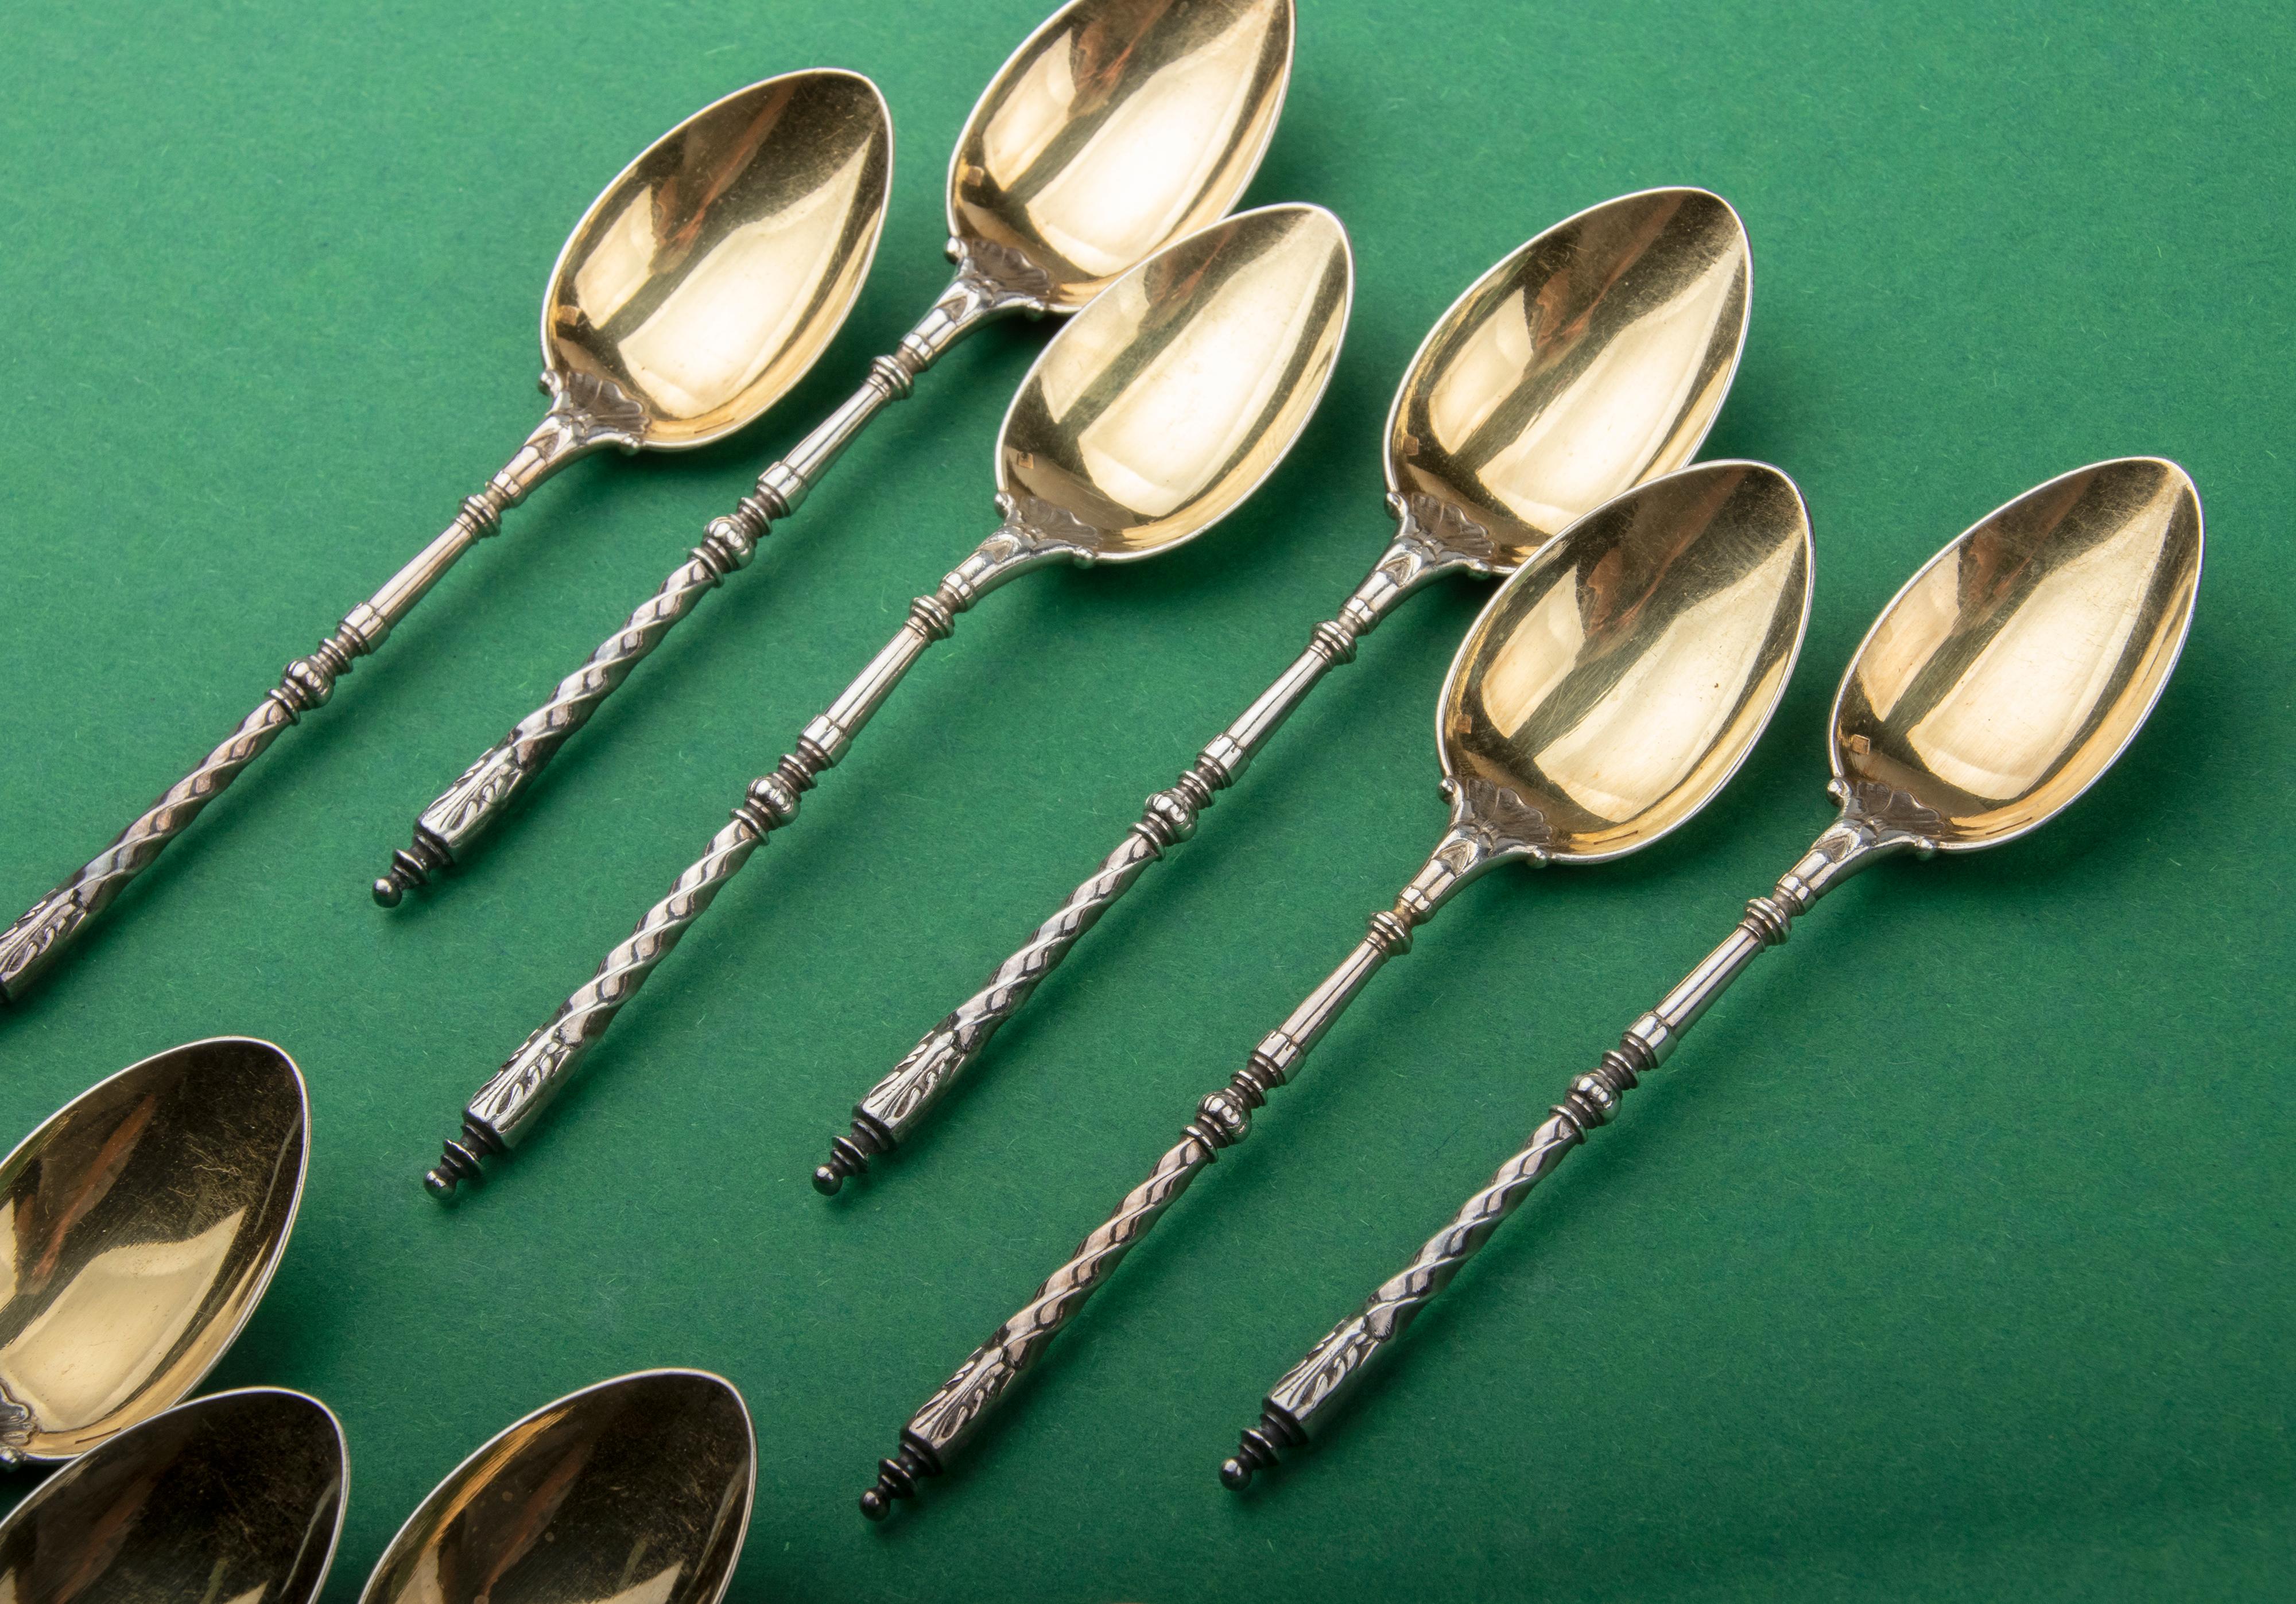 Set of 12 Antique Silver-Plated and Gilded Tea spoons made by Christofle In Good Condition For Sale In Casteren, Noord-Brabant